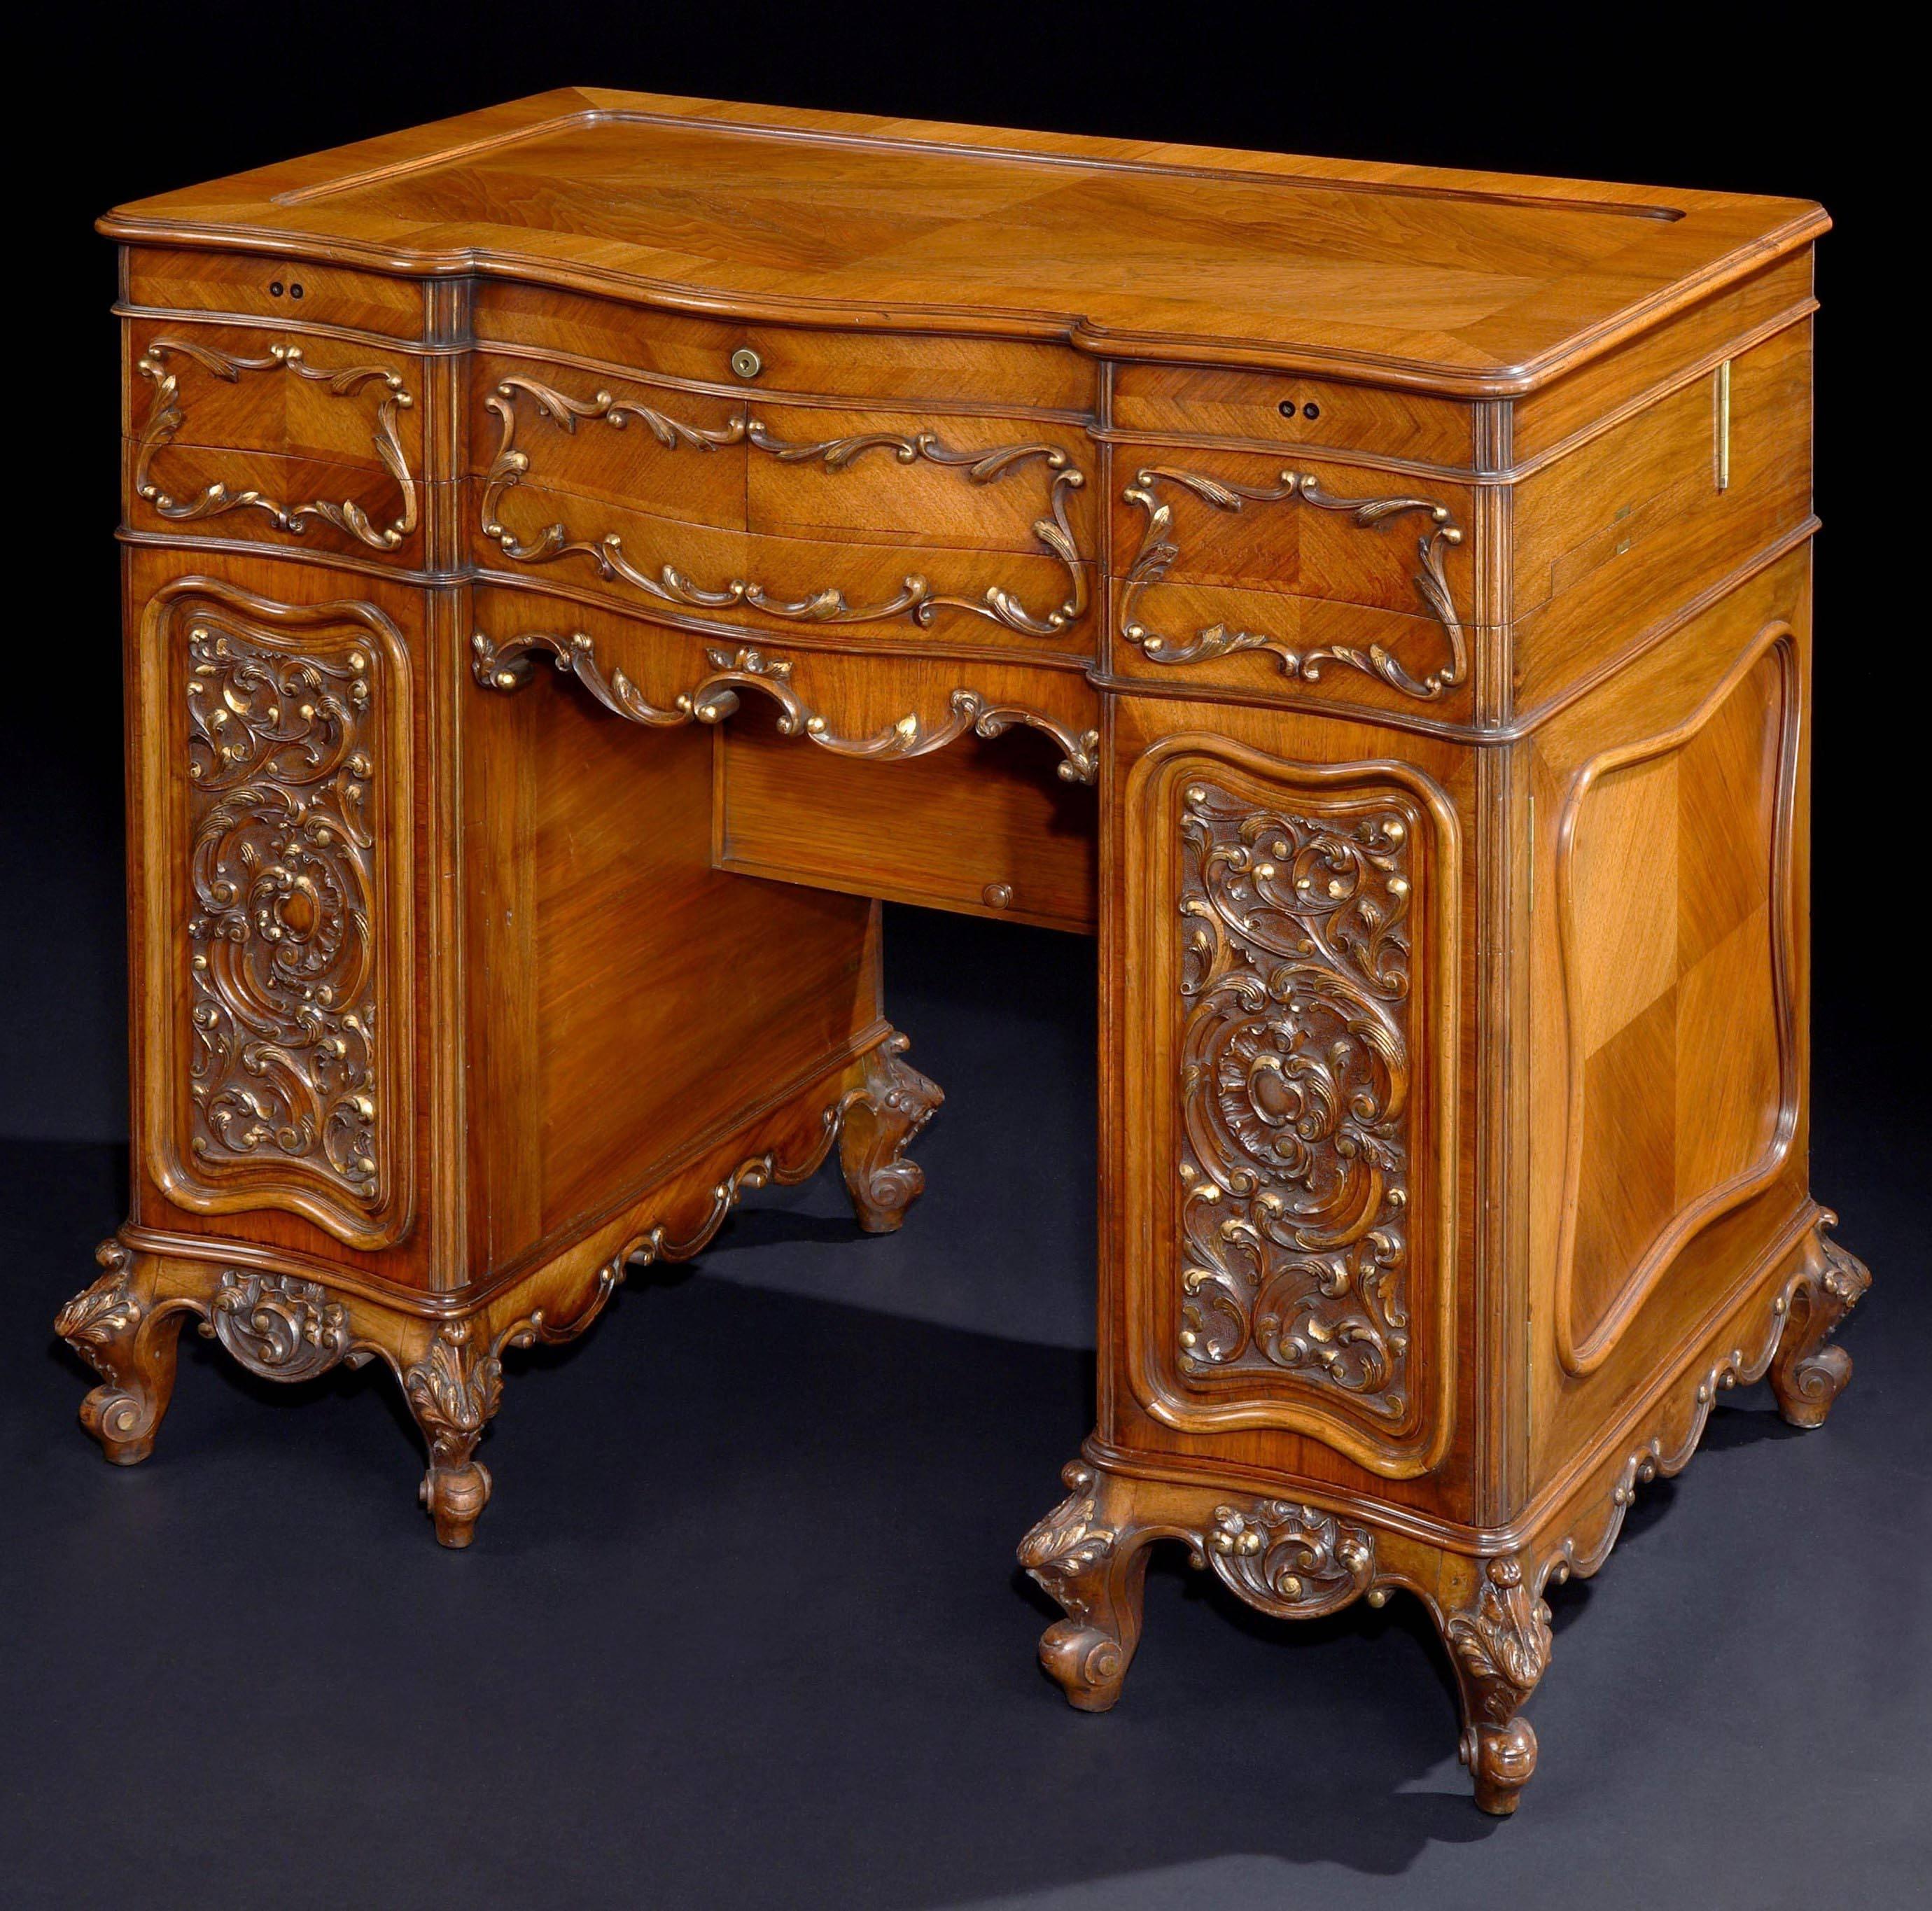 A ladies dressing table attributed to George Betjemann & Sons.

Constructed in quarter veneered walnut, rising from short cabriole feet, of kneehole pedestal form, with a shaped and moulded apron: the sides with asymmetrical fielded panel, the